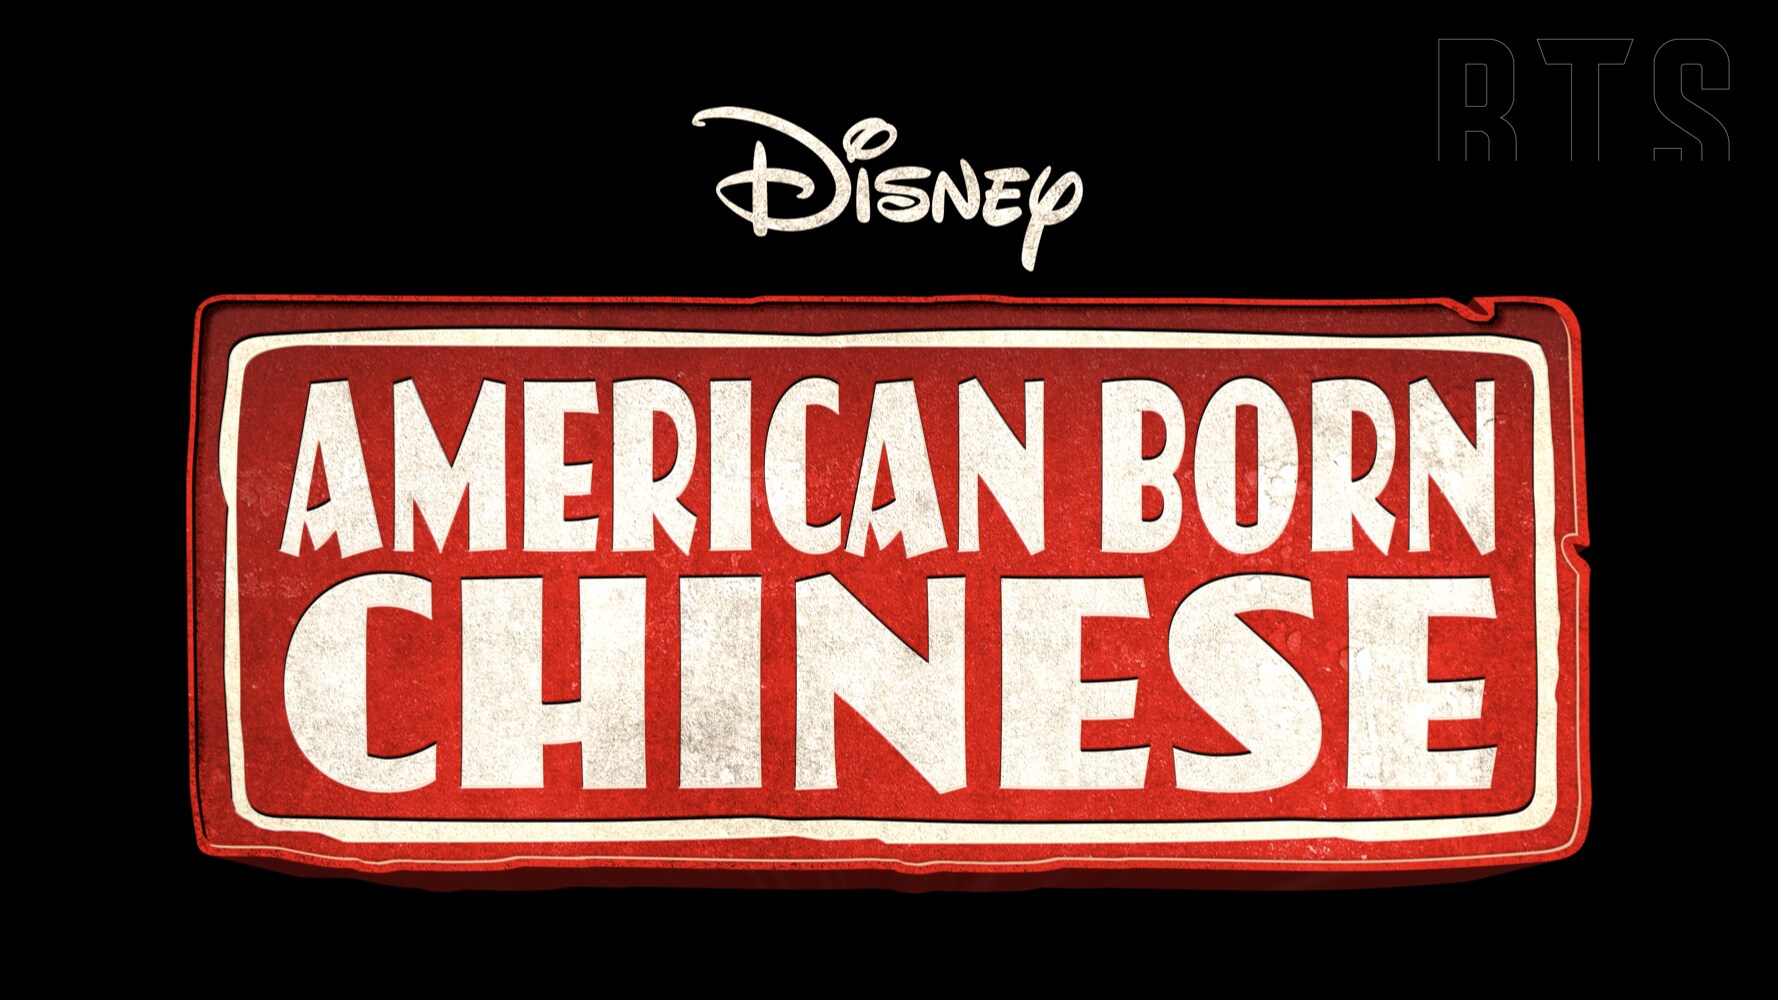 Disney+ Announces Exciting Guest Stars For Original Series "American Born Chinese"